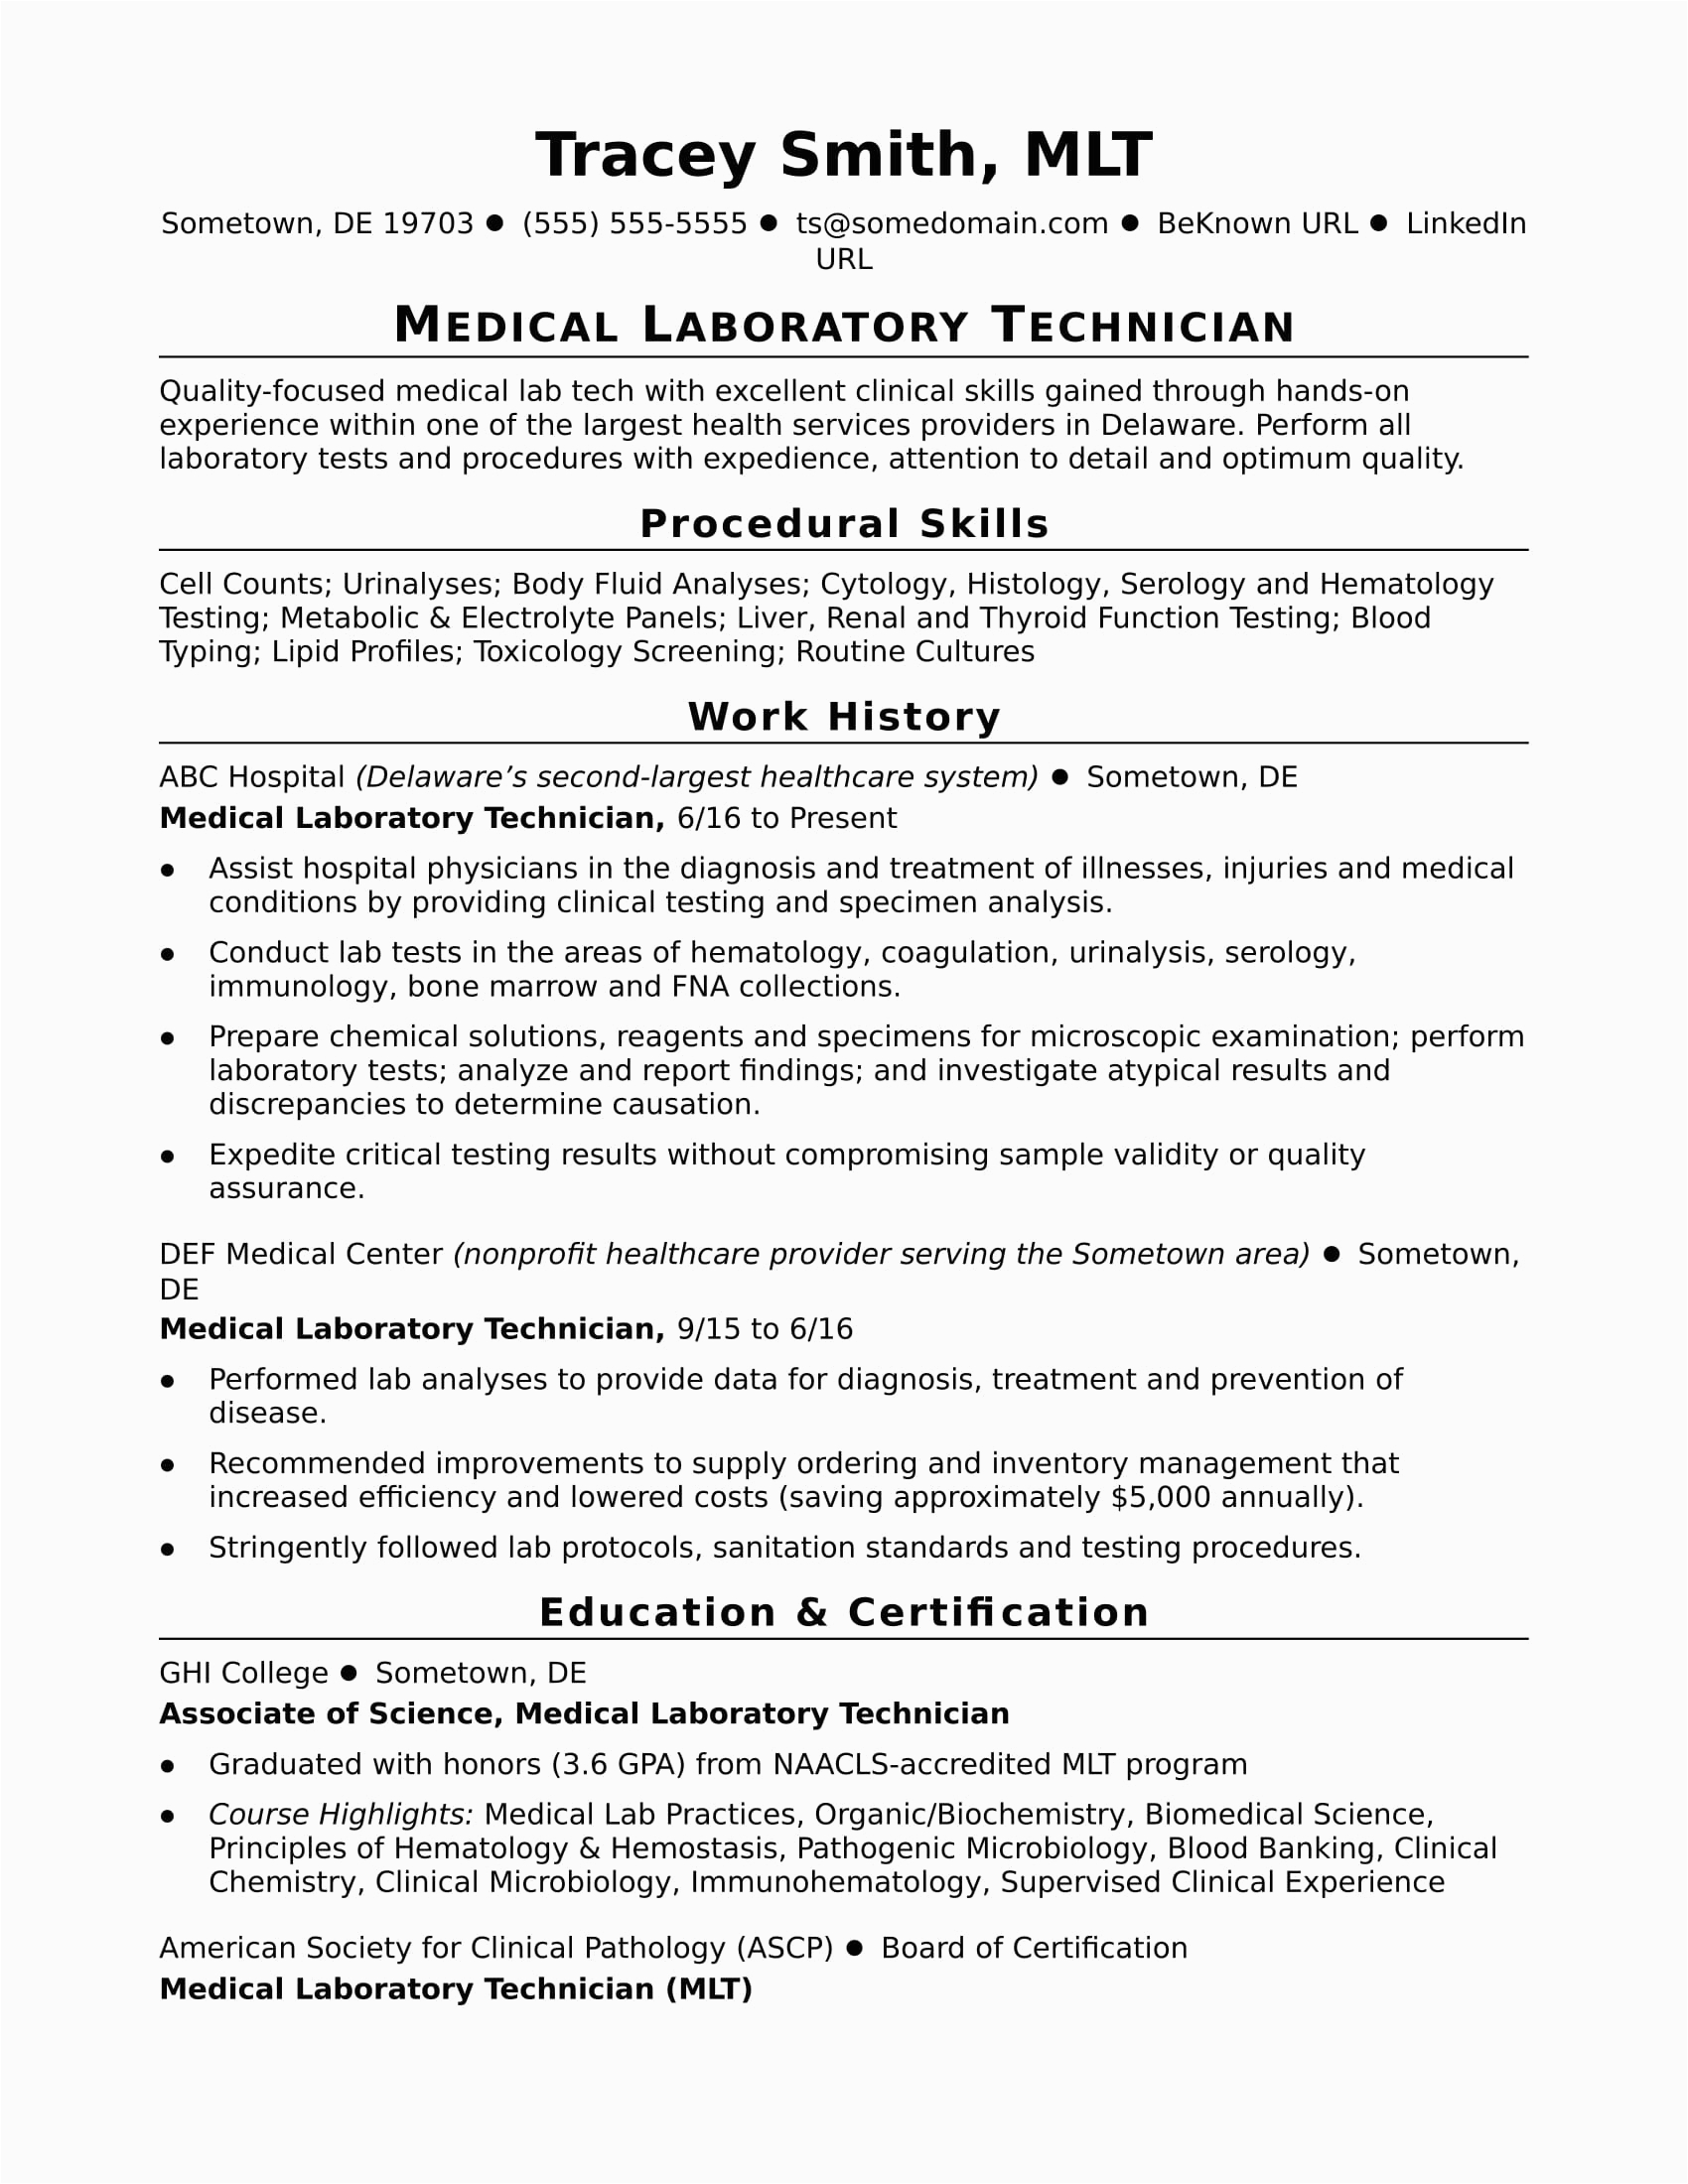 Sample Resume for Lab Technician Entry Level Entry Level Lab Technician Resume Sample